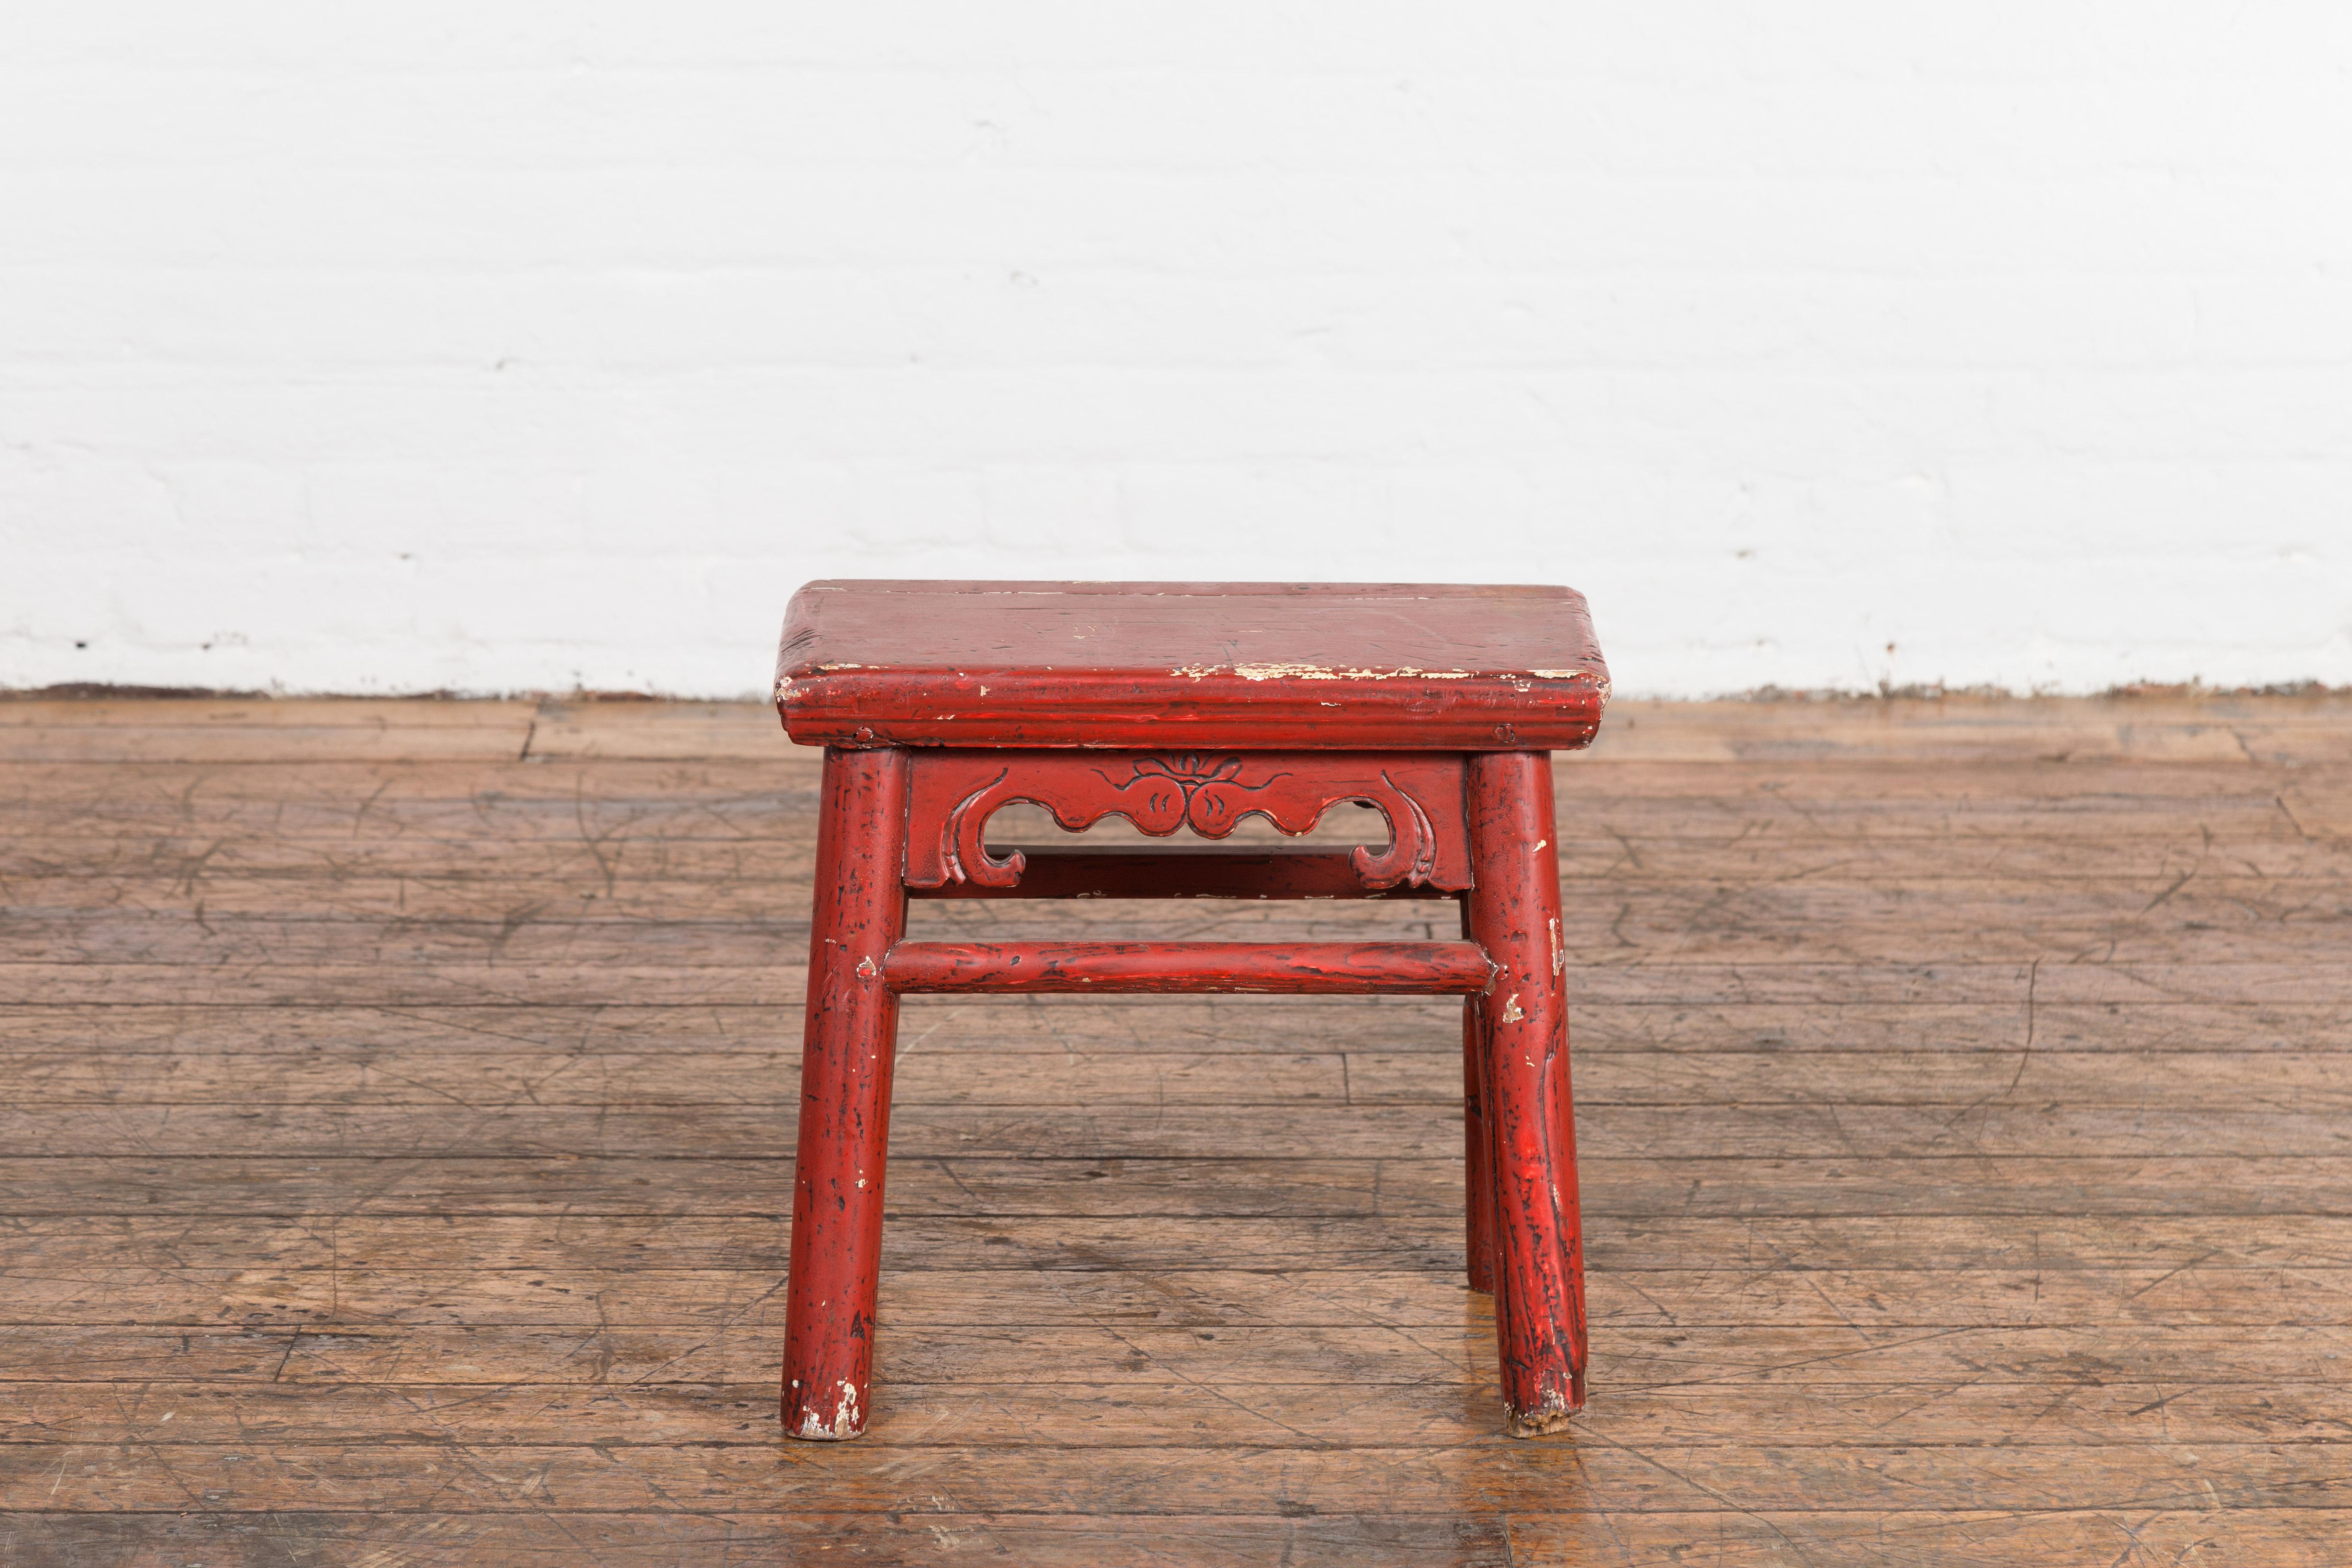 A Chinese Qing Dynasty period A Frame red lacquered wooden stool from the 19th century, with carved apron, side stretchers and weathered patina. Created in China during the Qing Dynasty period in the 19th century, this wooden A Frame stool showcases